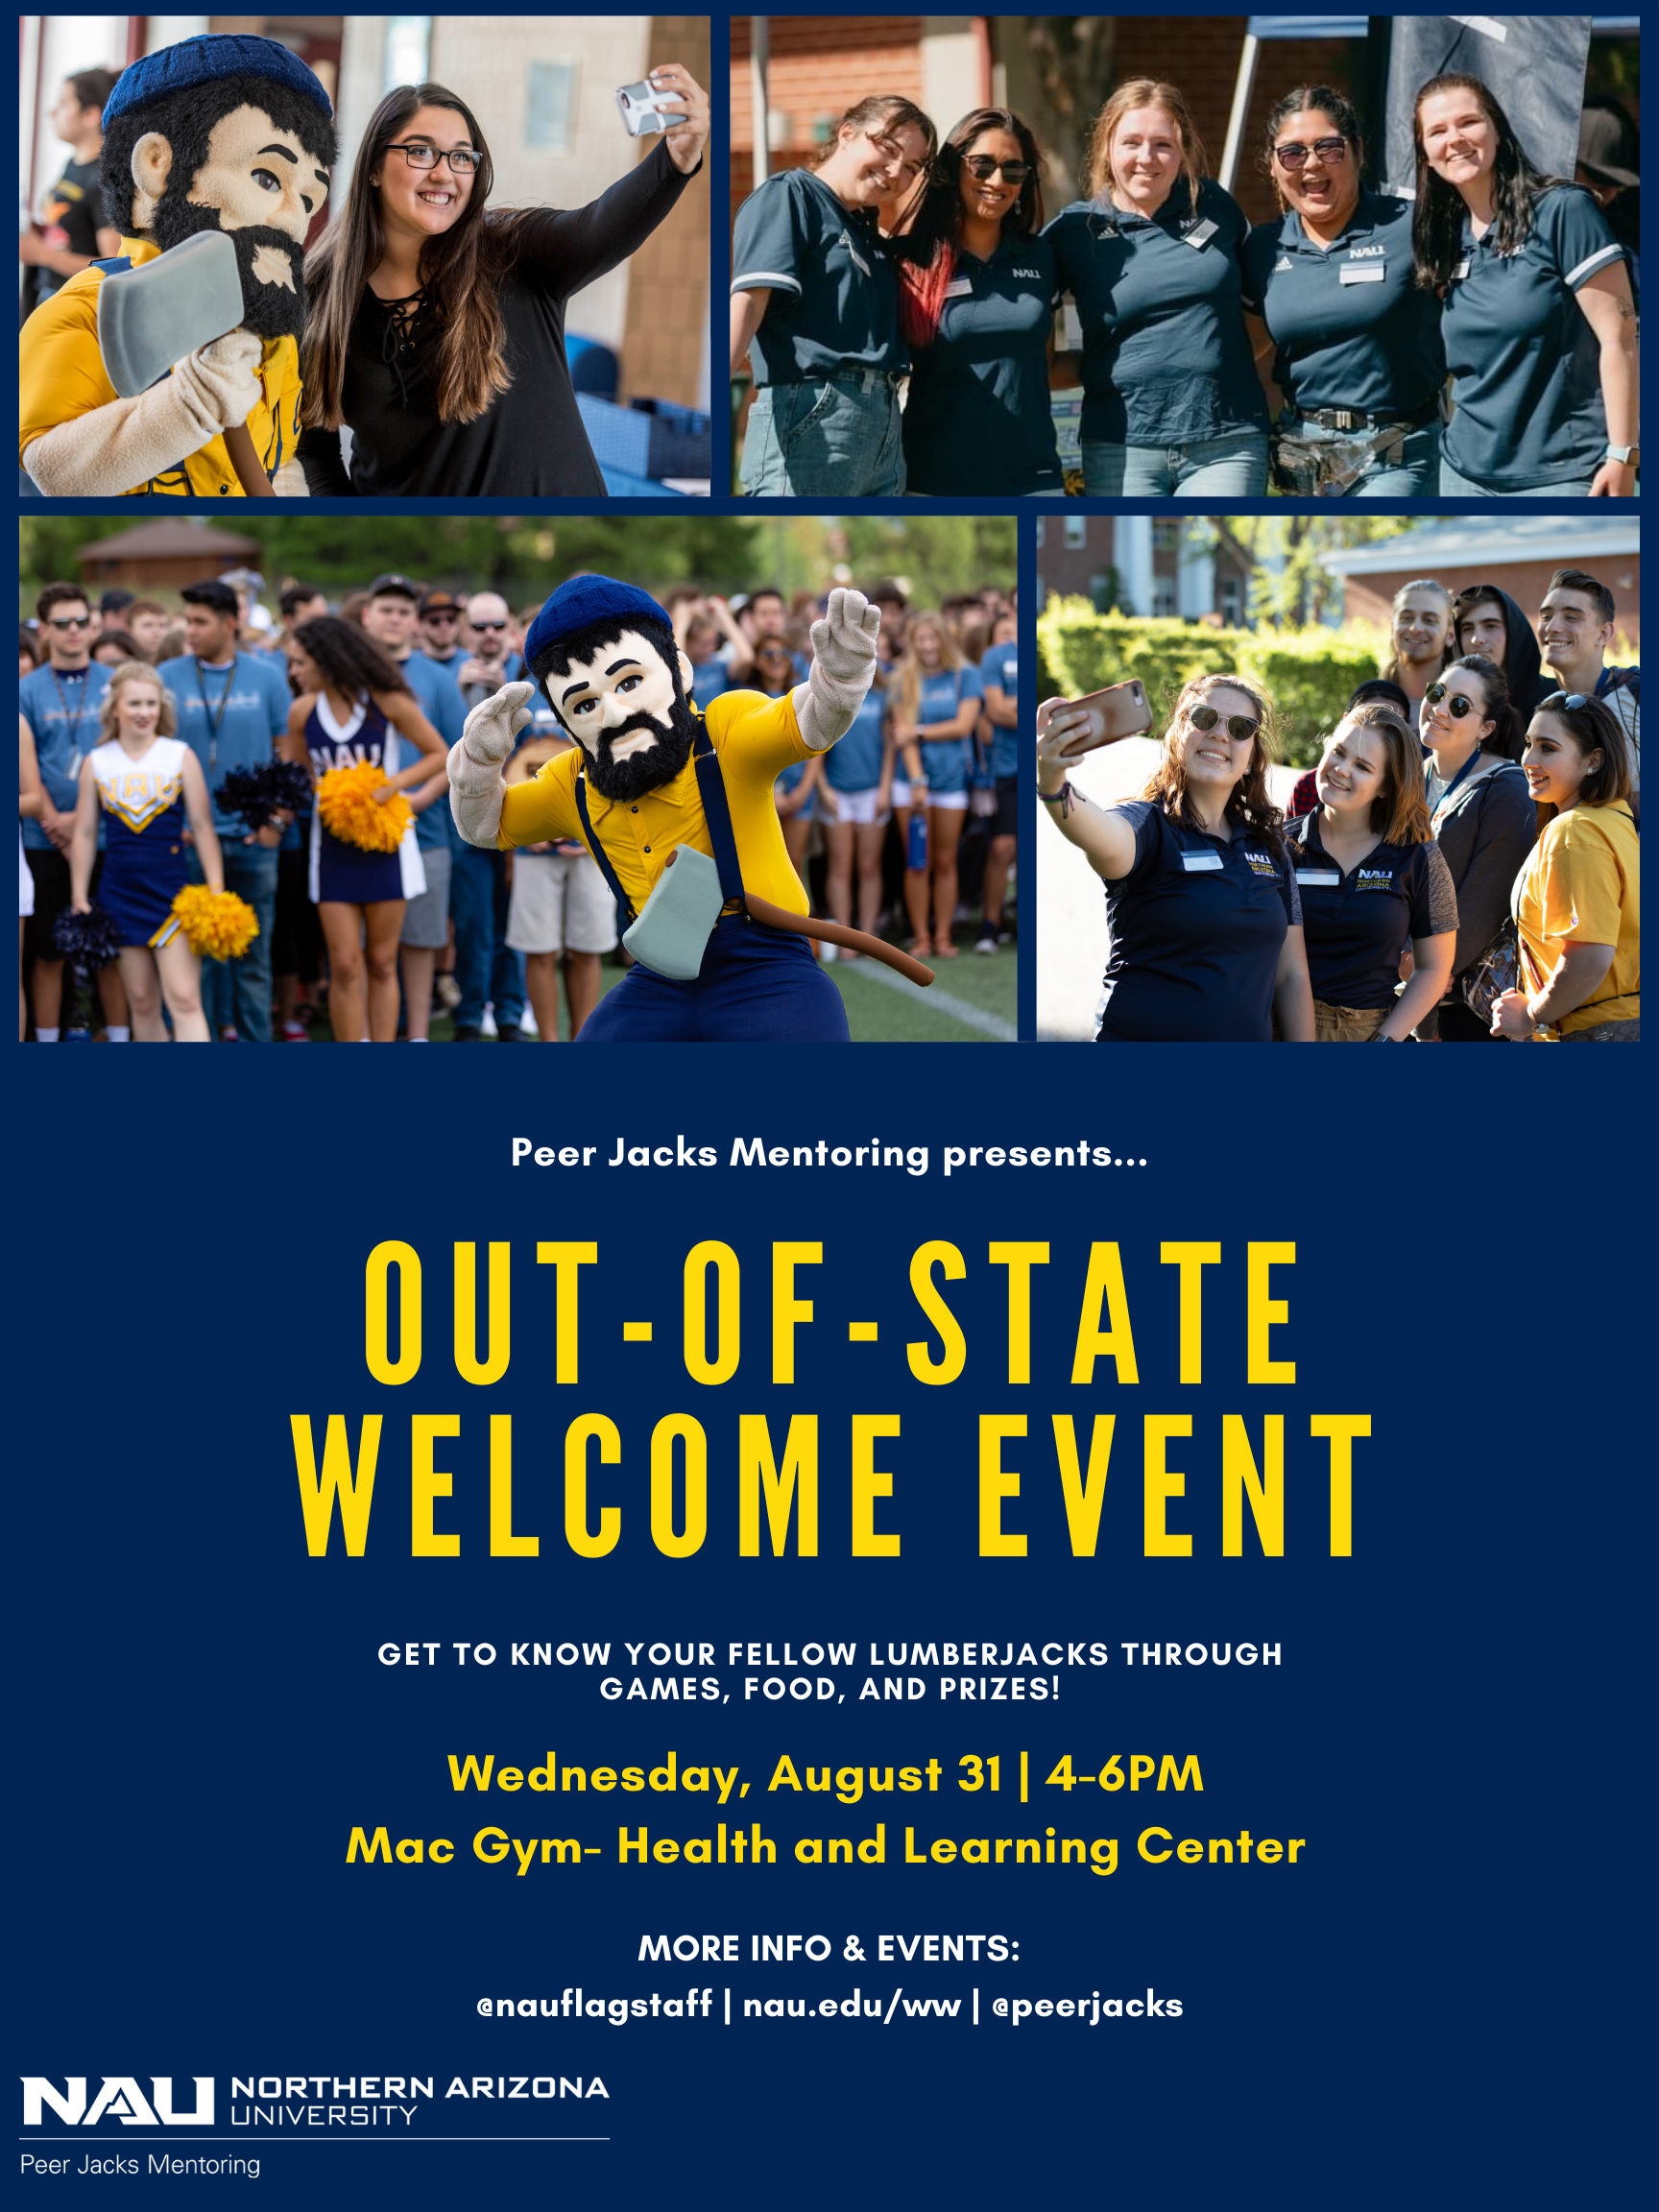 Out-of-State Welcome Event - Join us on Wednesday, August 31st from 4pm-6pm at the HLC-Mac Gym